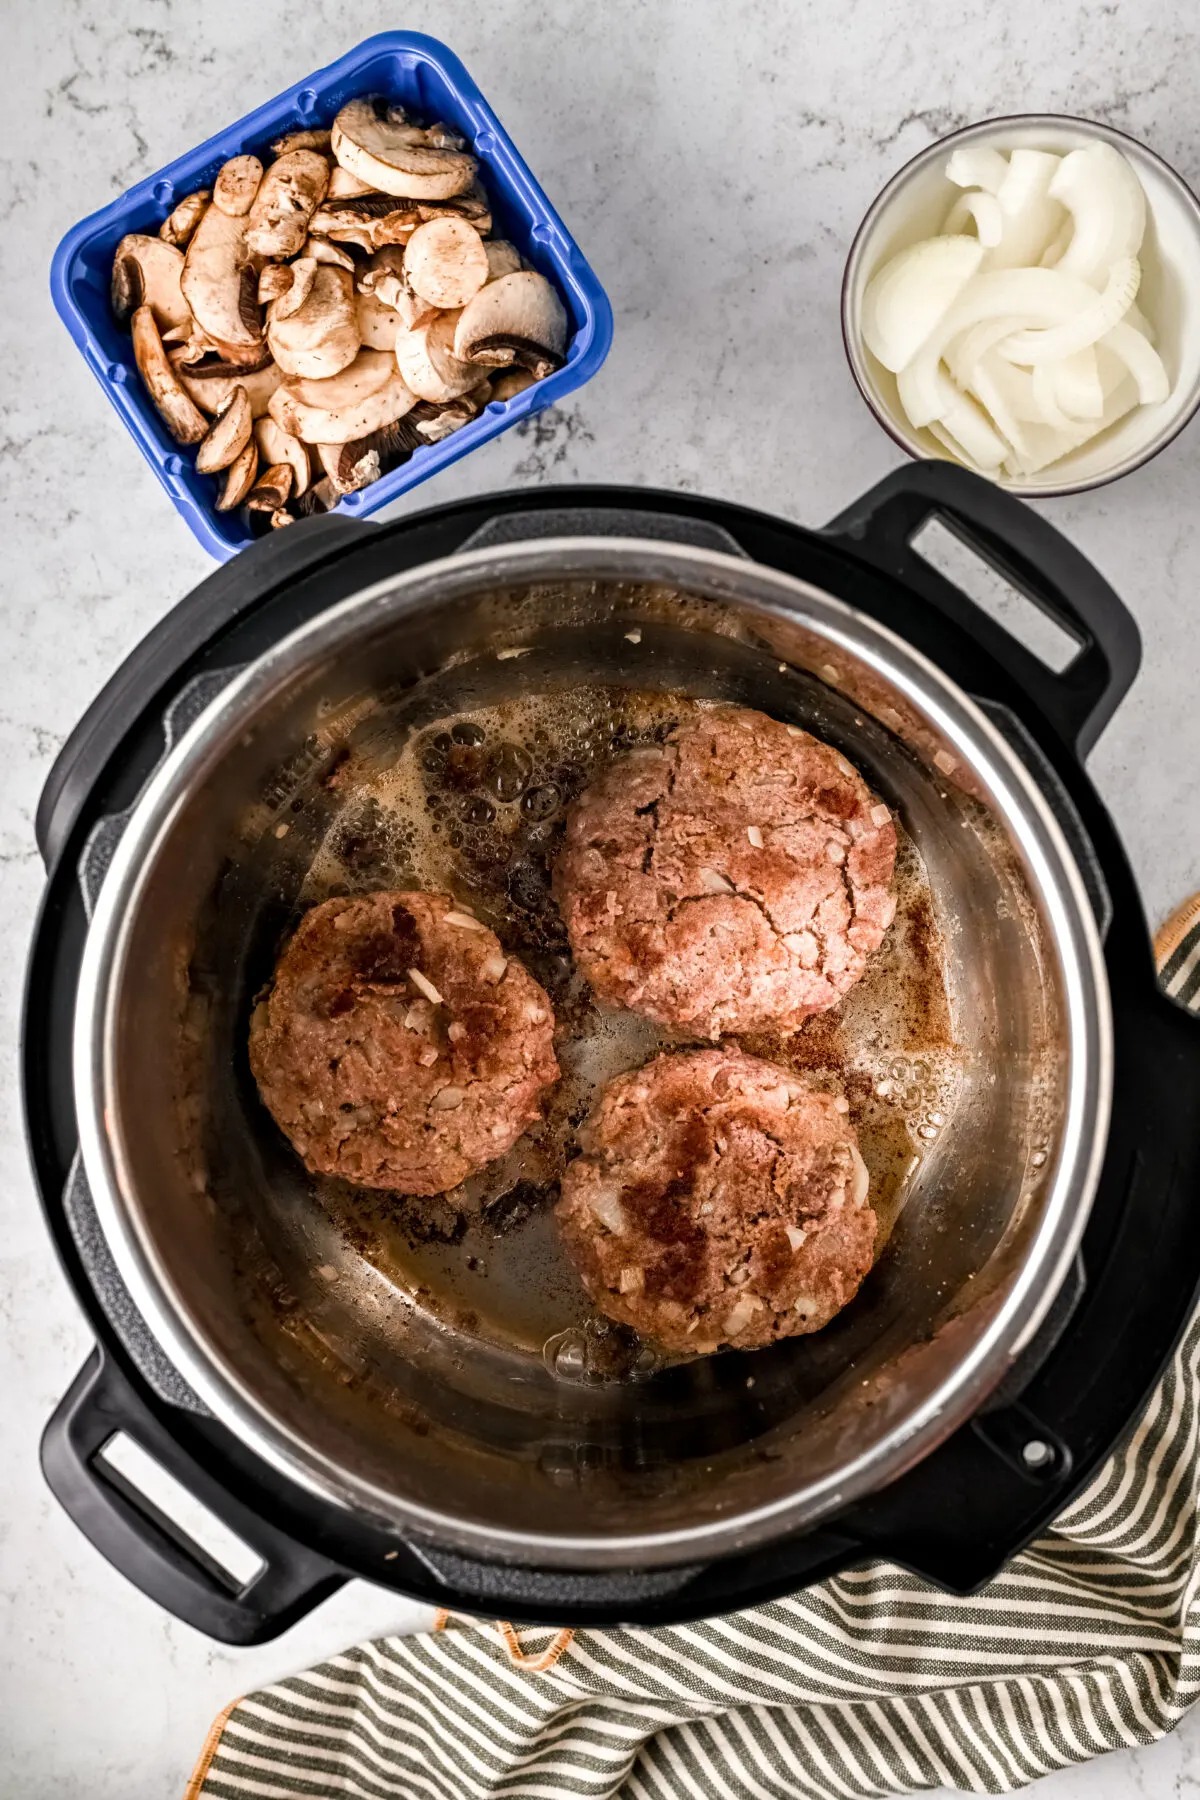 Cooked patties in the instant pot.